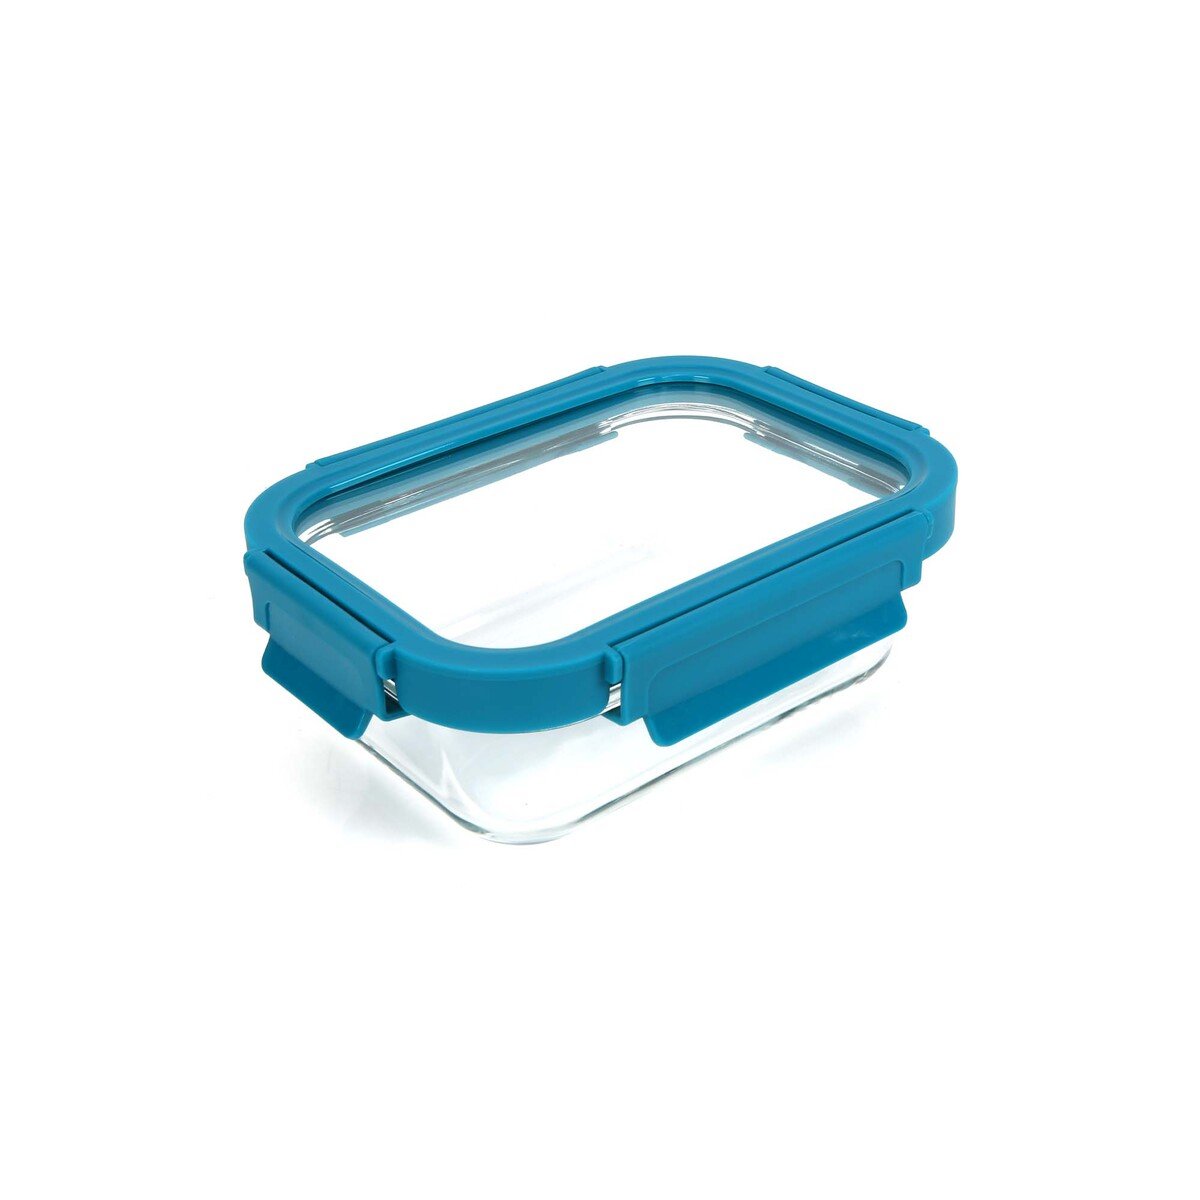 Chefline Rectangle Food Storage Glass Container With Lid, Blue (Teal Blue), 370 ml